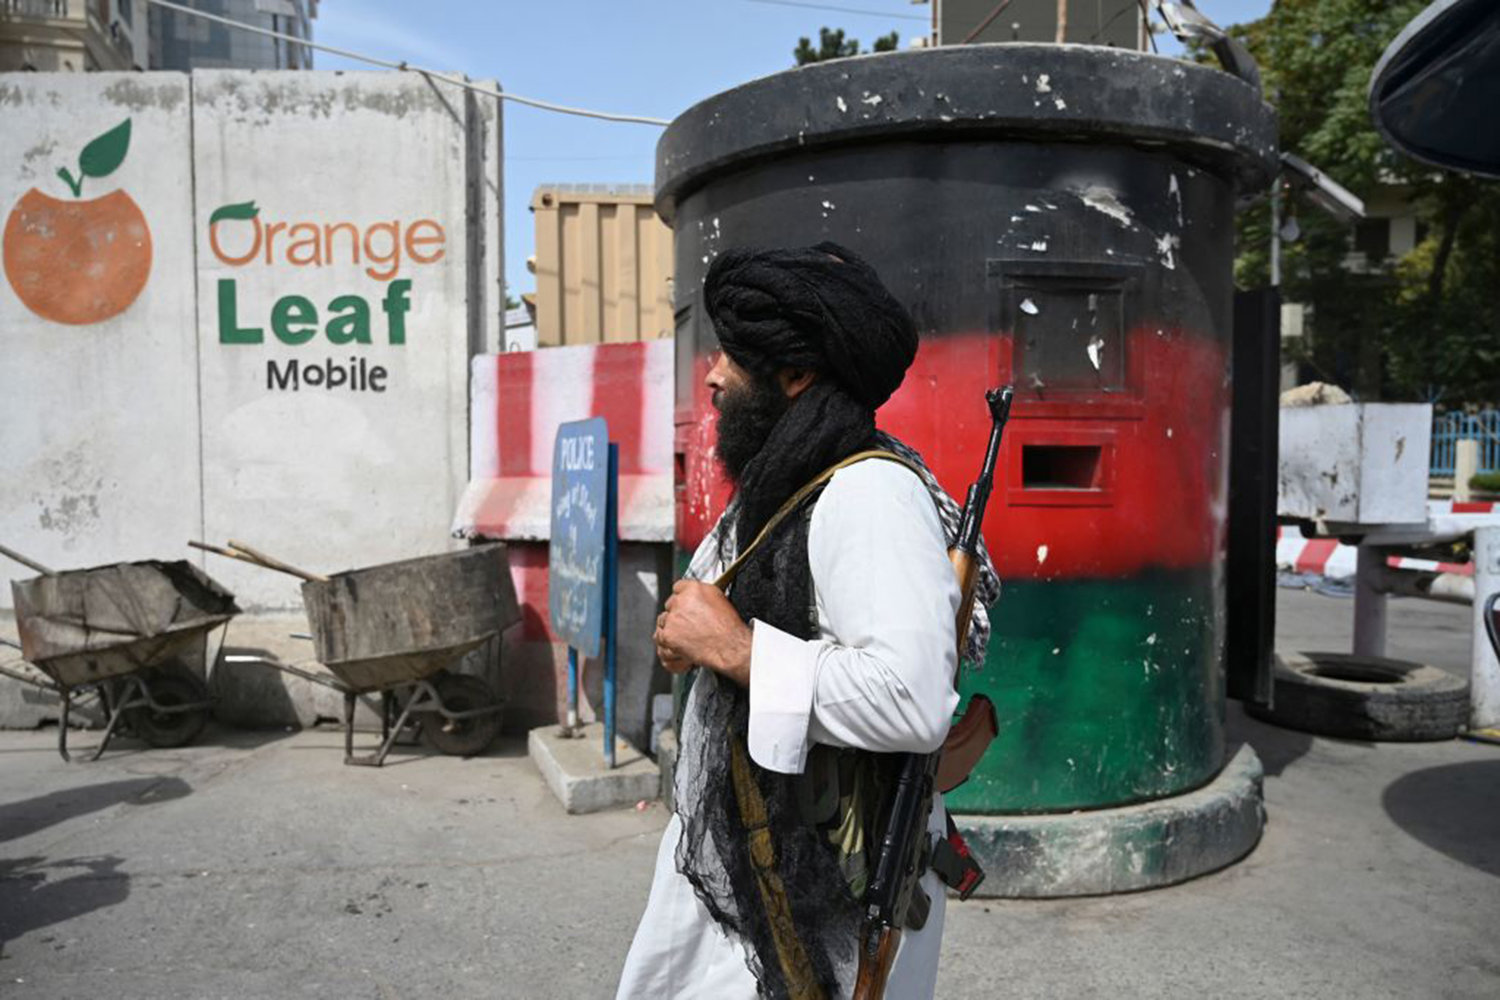 A Taliban fighter patrols along a street in Kabul on August 17, 2021, as the Taliban moved quickly to restart the Afghan capital following their stunning takeover of Kabul and told government staff to return to work. (Wakil Kohsar/AFP via Getty Images/TNS)